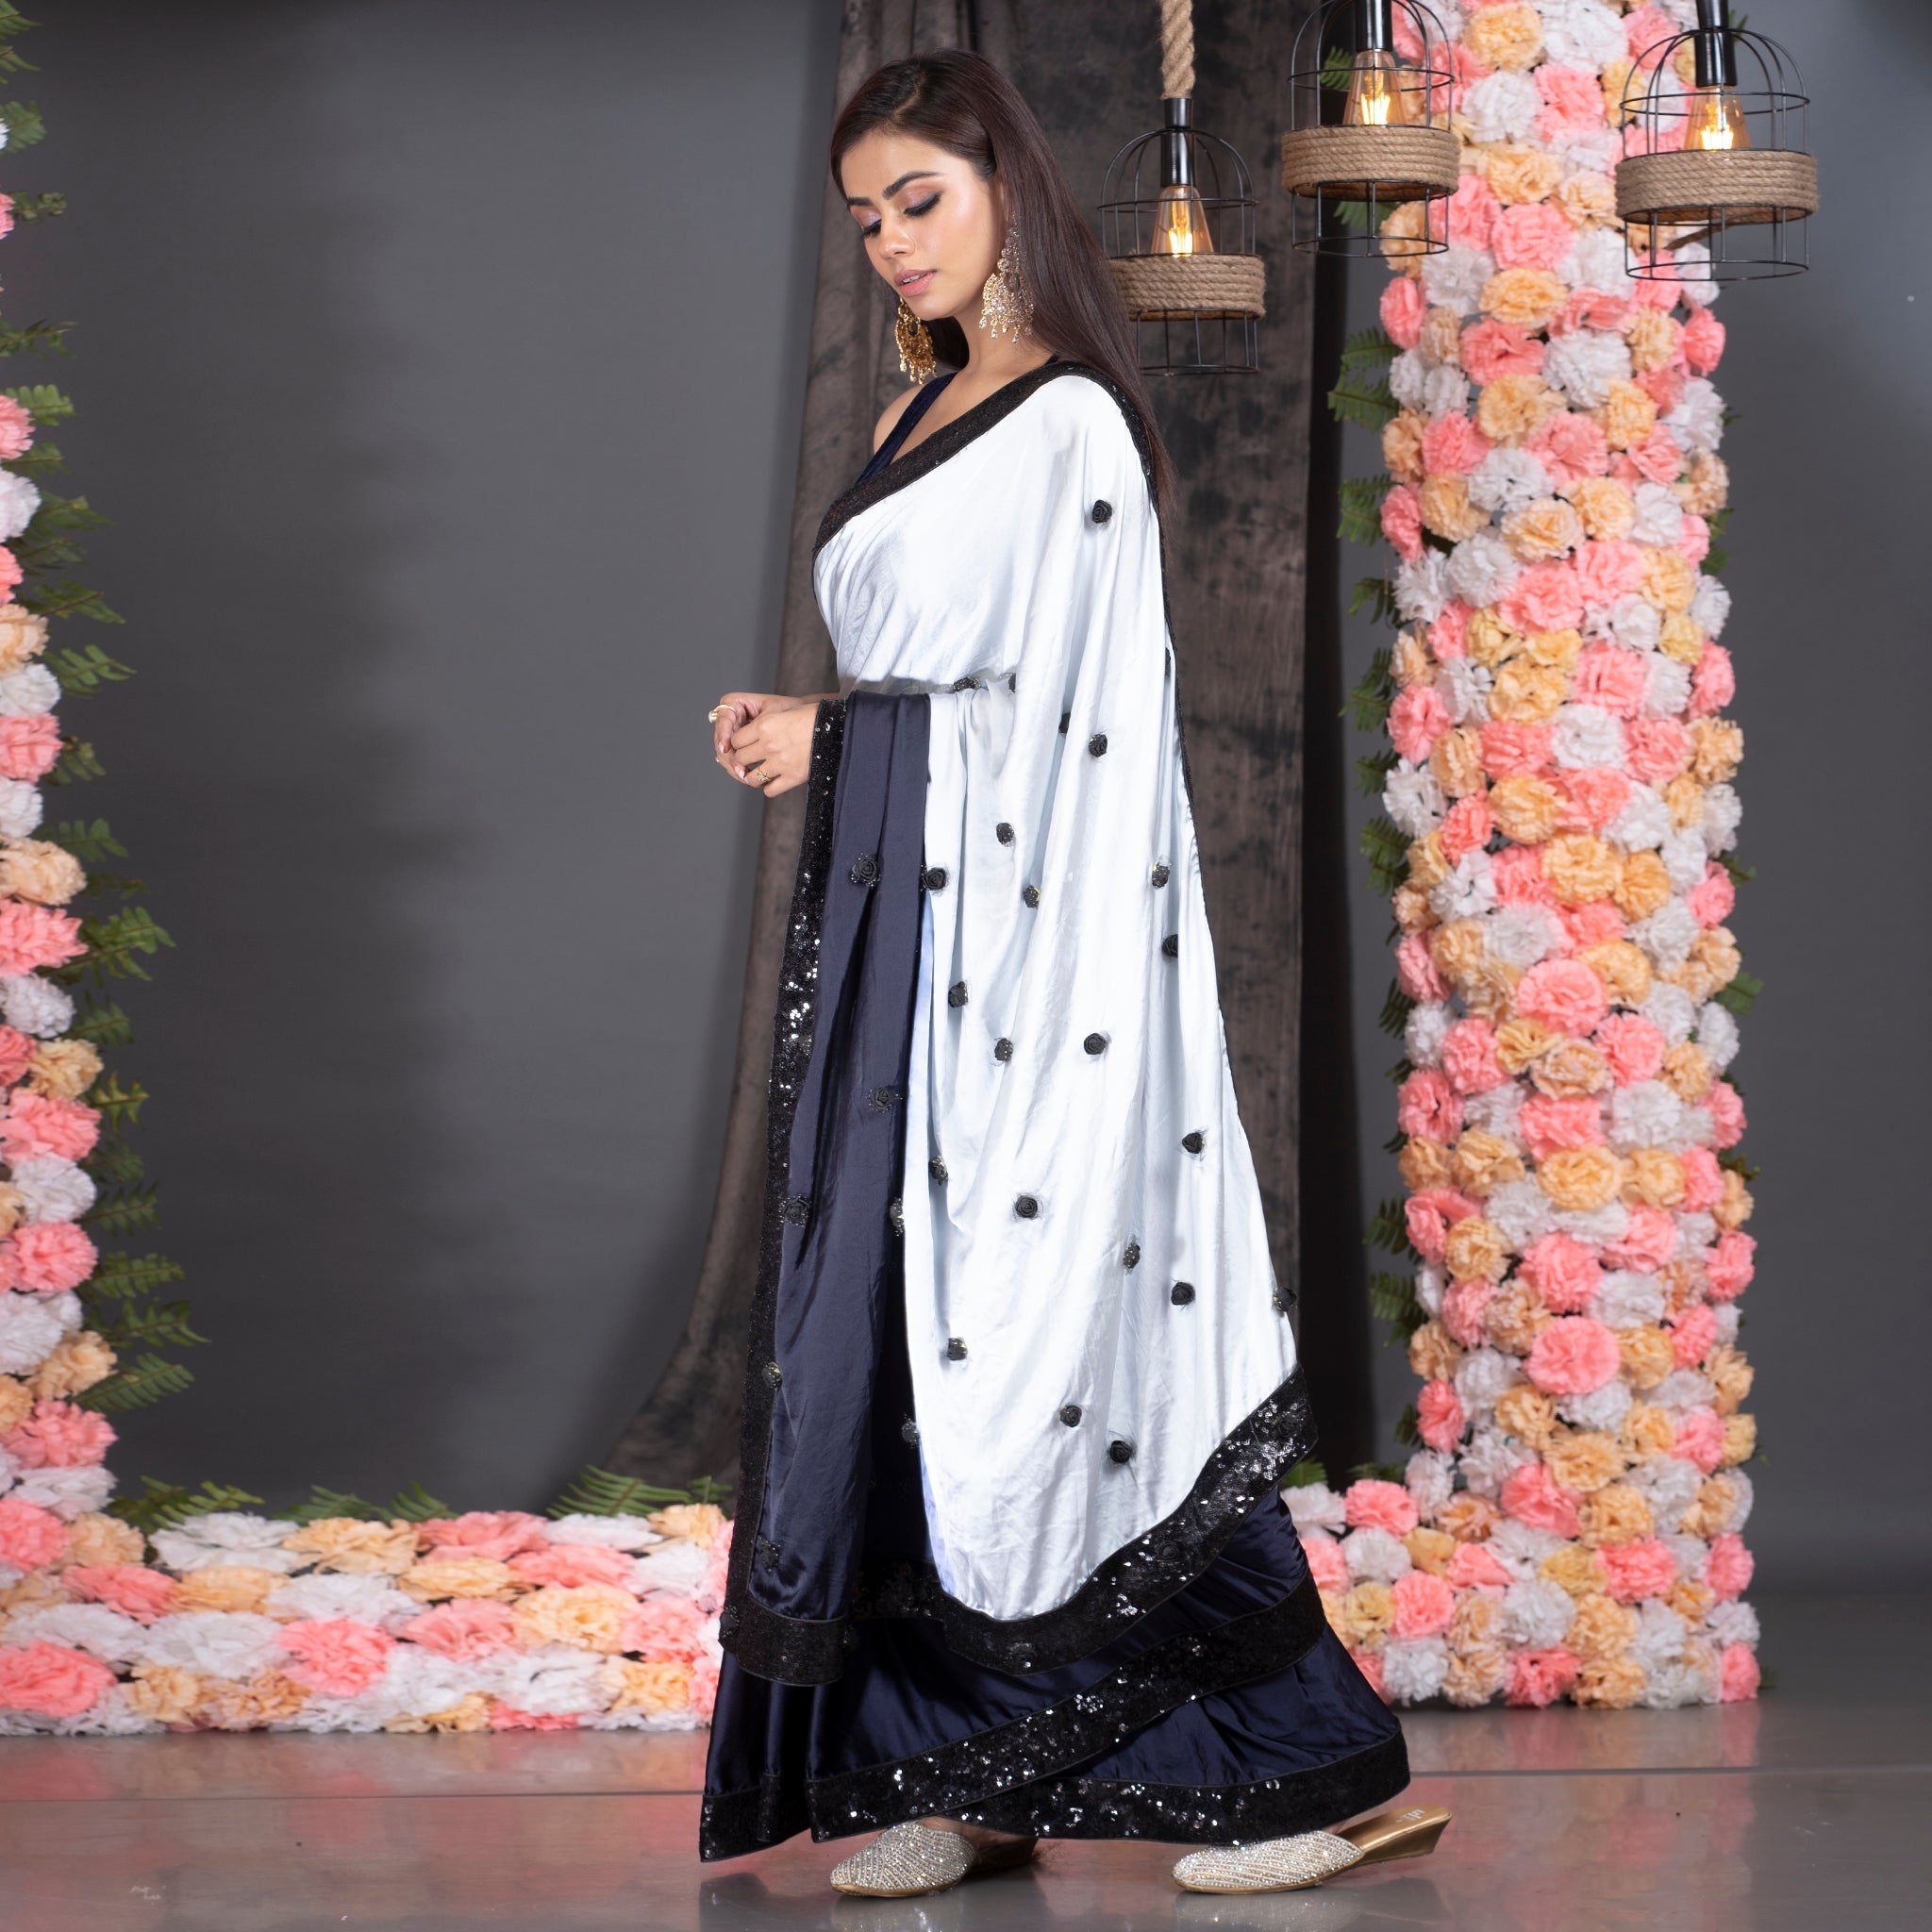 Women's Grey And Navy Blue Ombre Satin Saree With Sequin Lace Border And Handmade Rosette Pallu - Boveee